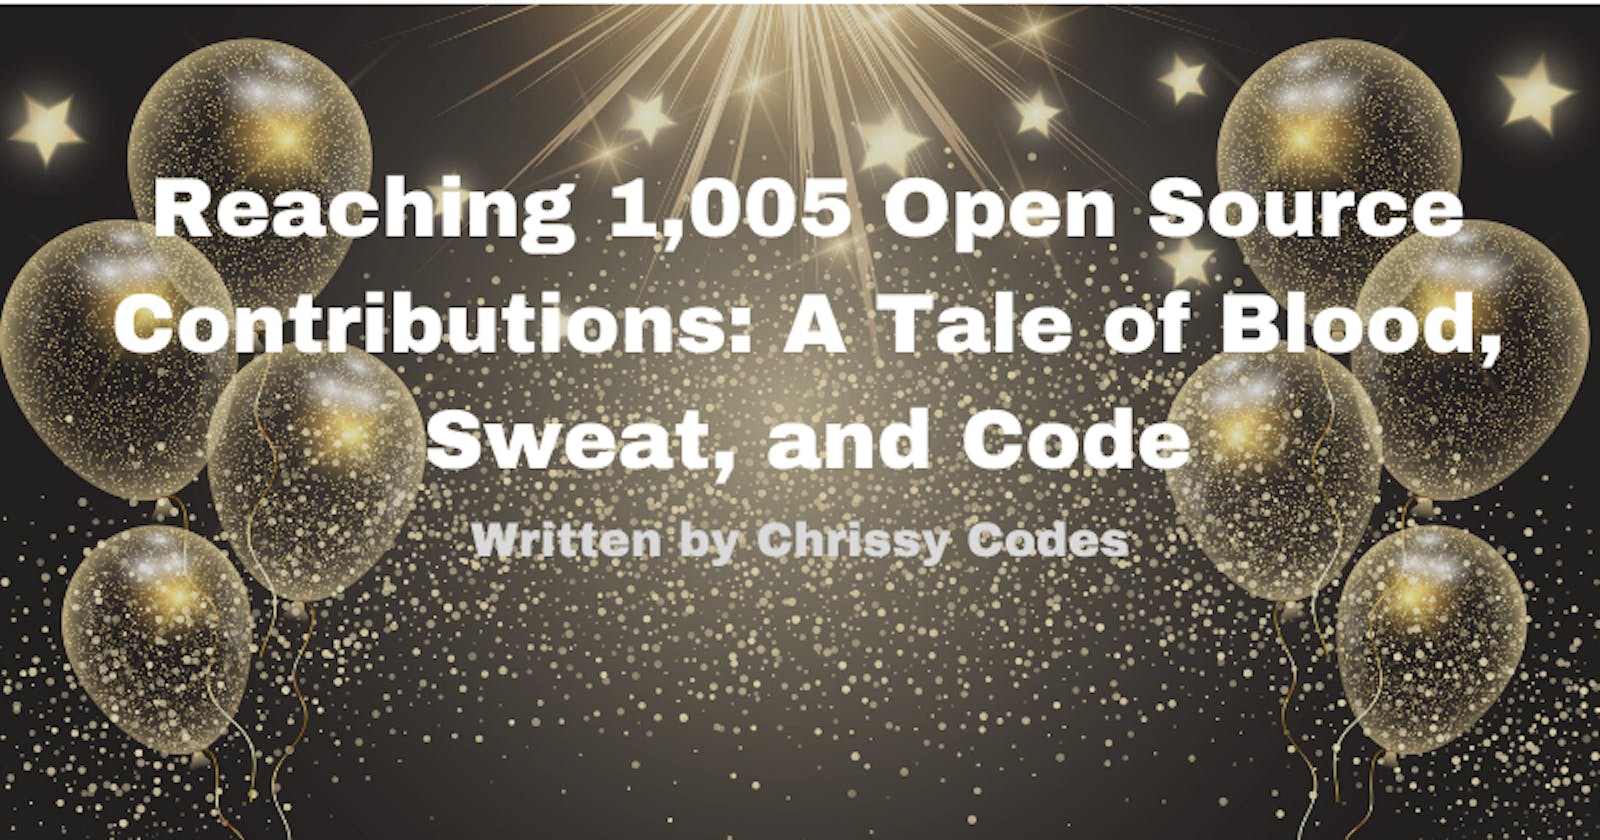 Reaching 1,005 Open Source Contributions: A Tale of Blood, Sweat, and Code